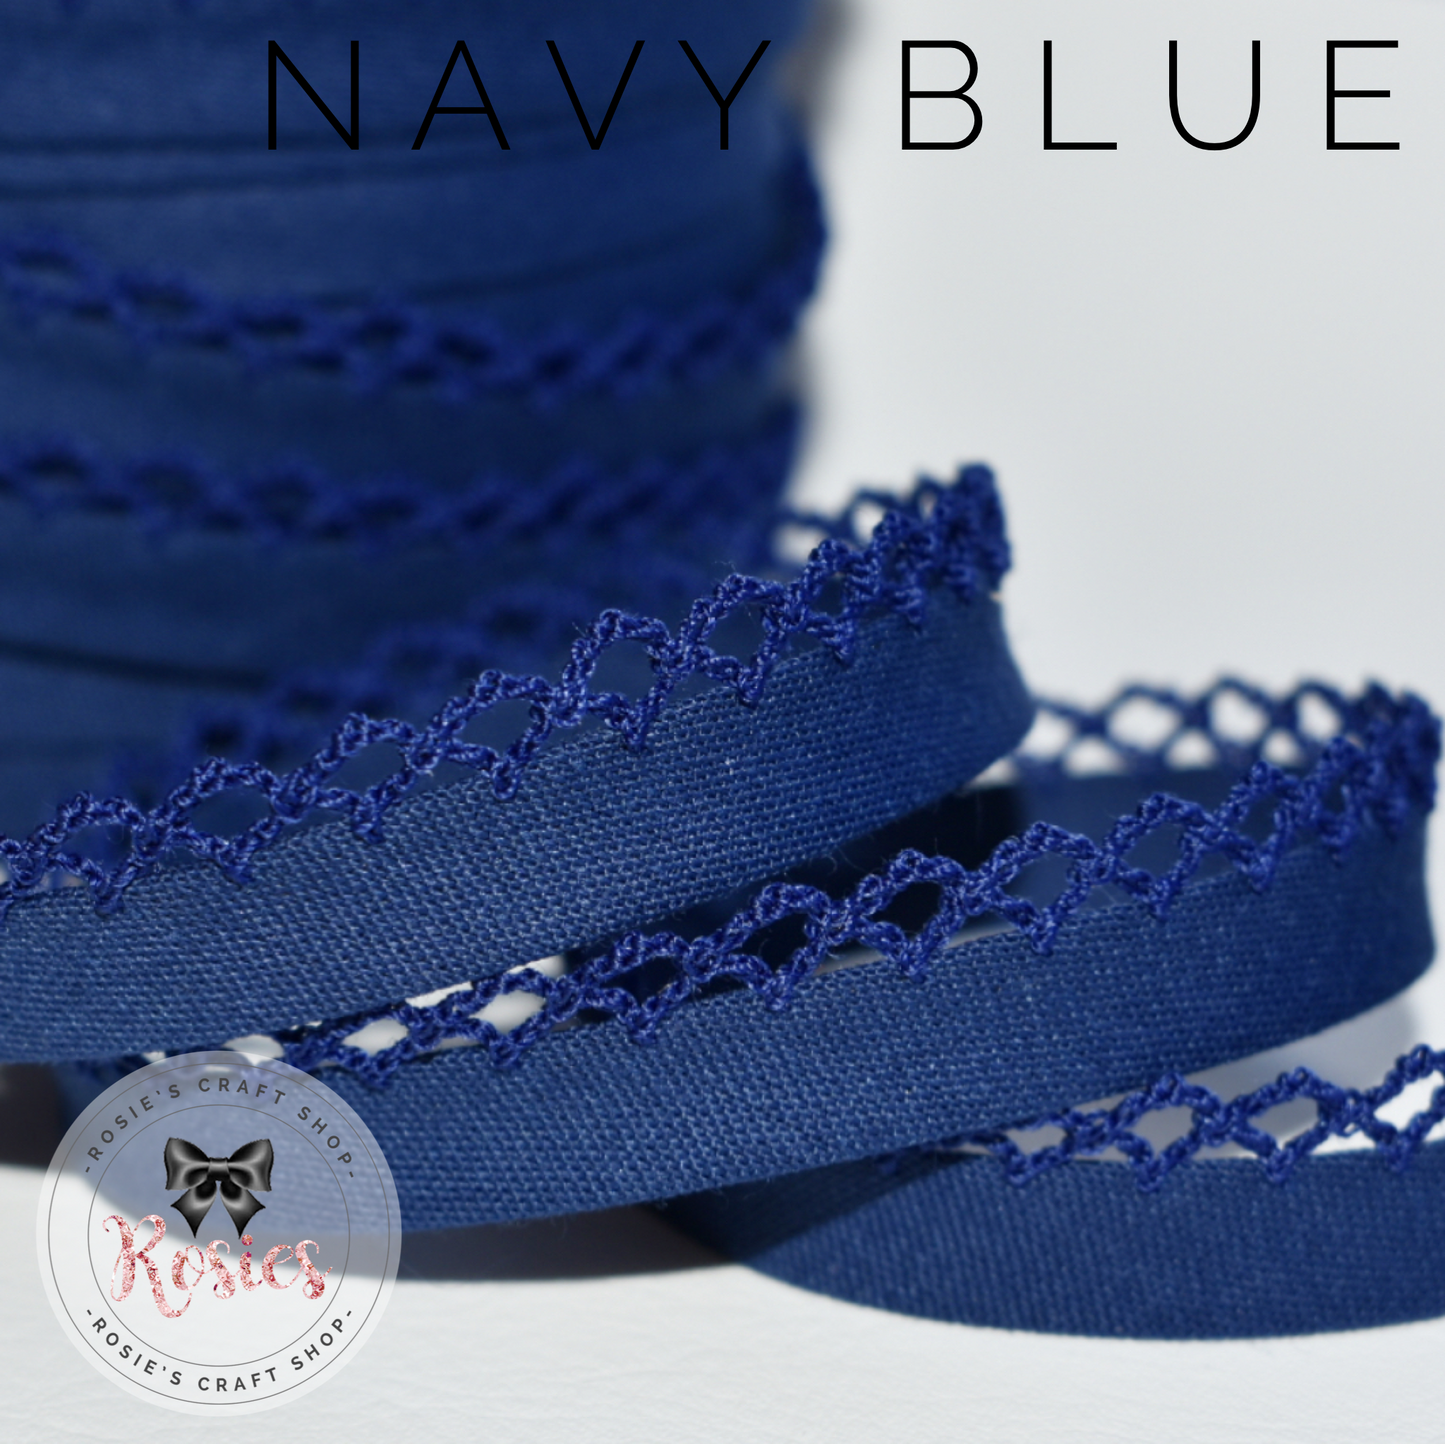 12mm Navy Blue Plain Pre-Folded Bias Binding with Scallop Lace Edge - Rosie's Craft Shop Ltd